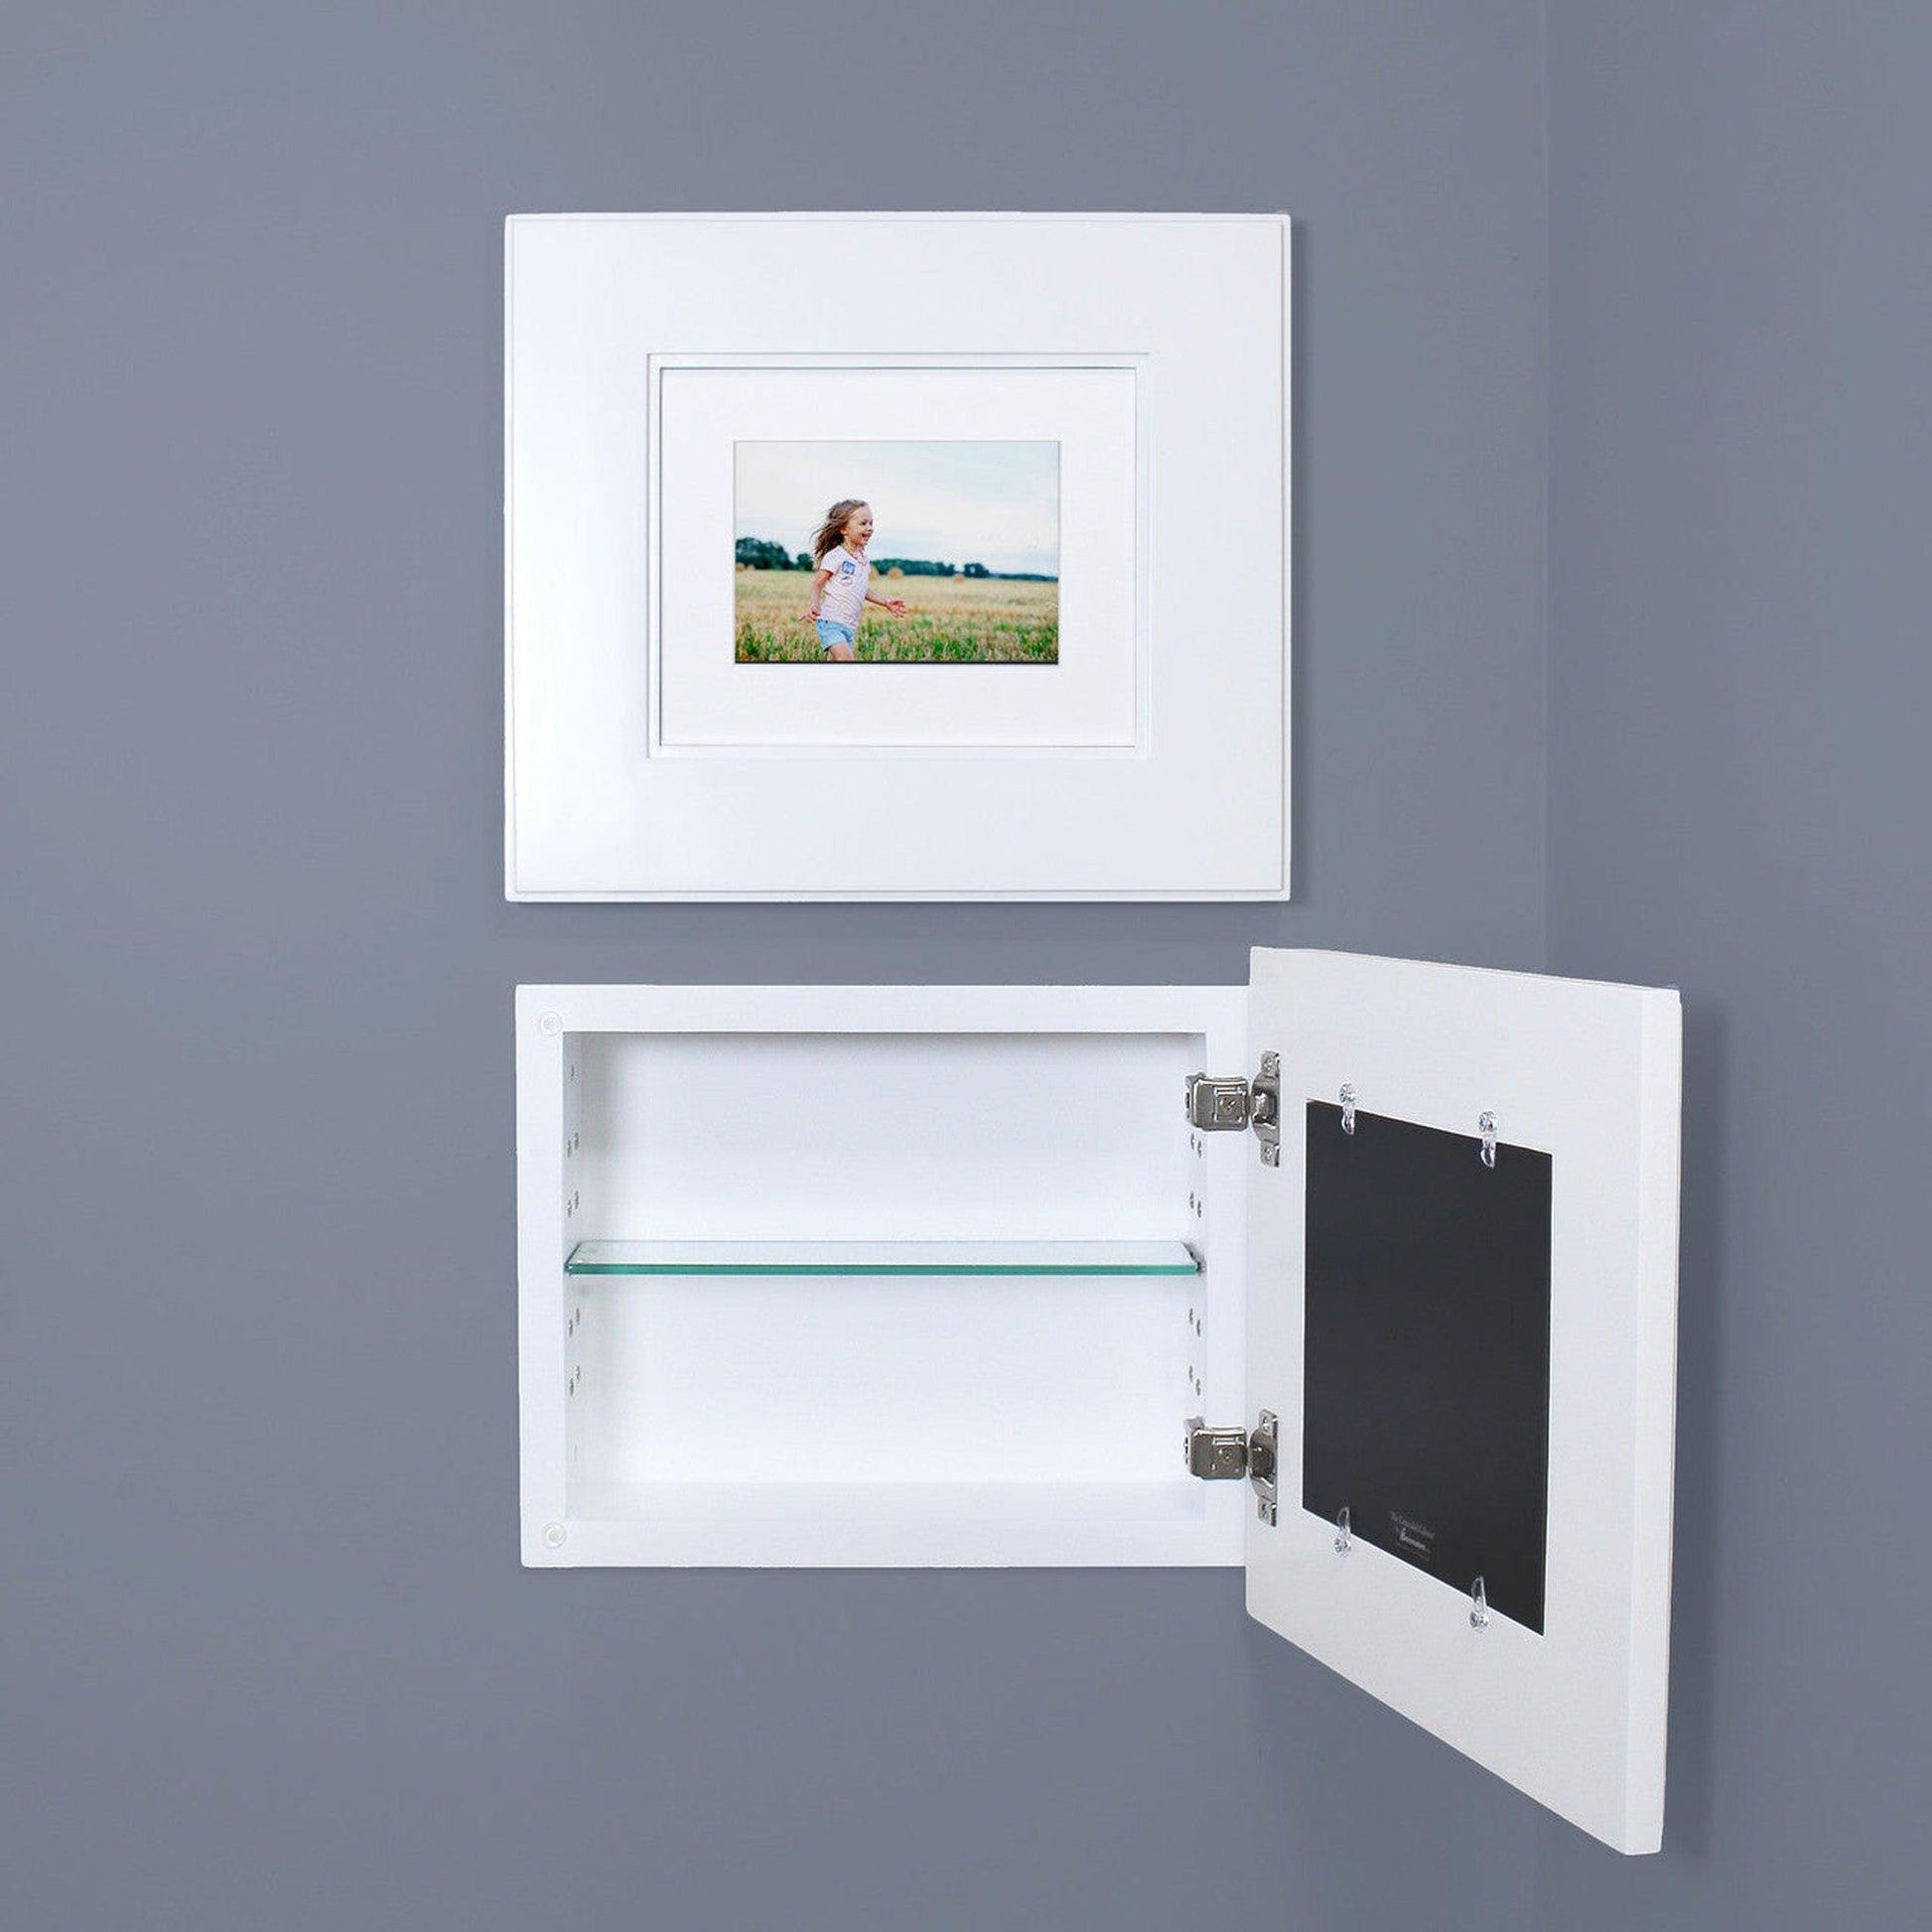 Fox Hollow Furnishings 14" x 11" White Compact Landscape Shaker Special 3" Depth Recessed Picture Frame Medicine Cabinet With Mirror